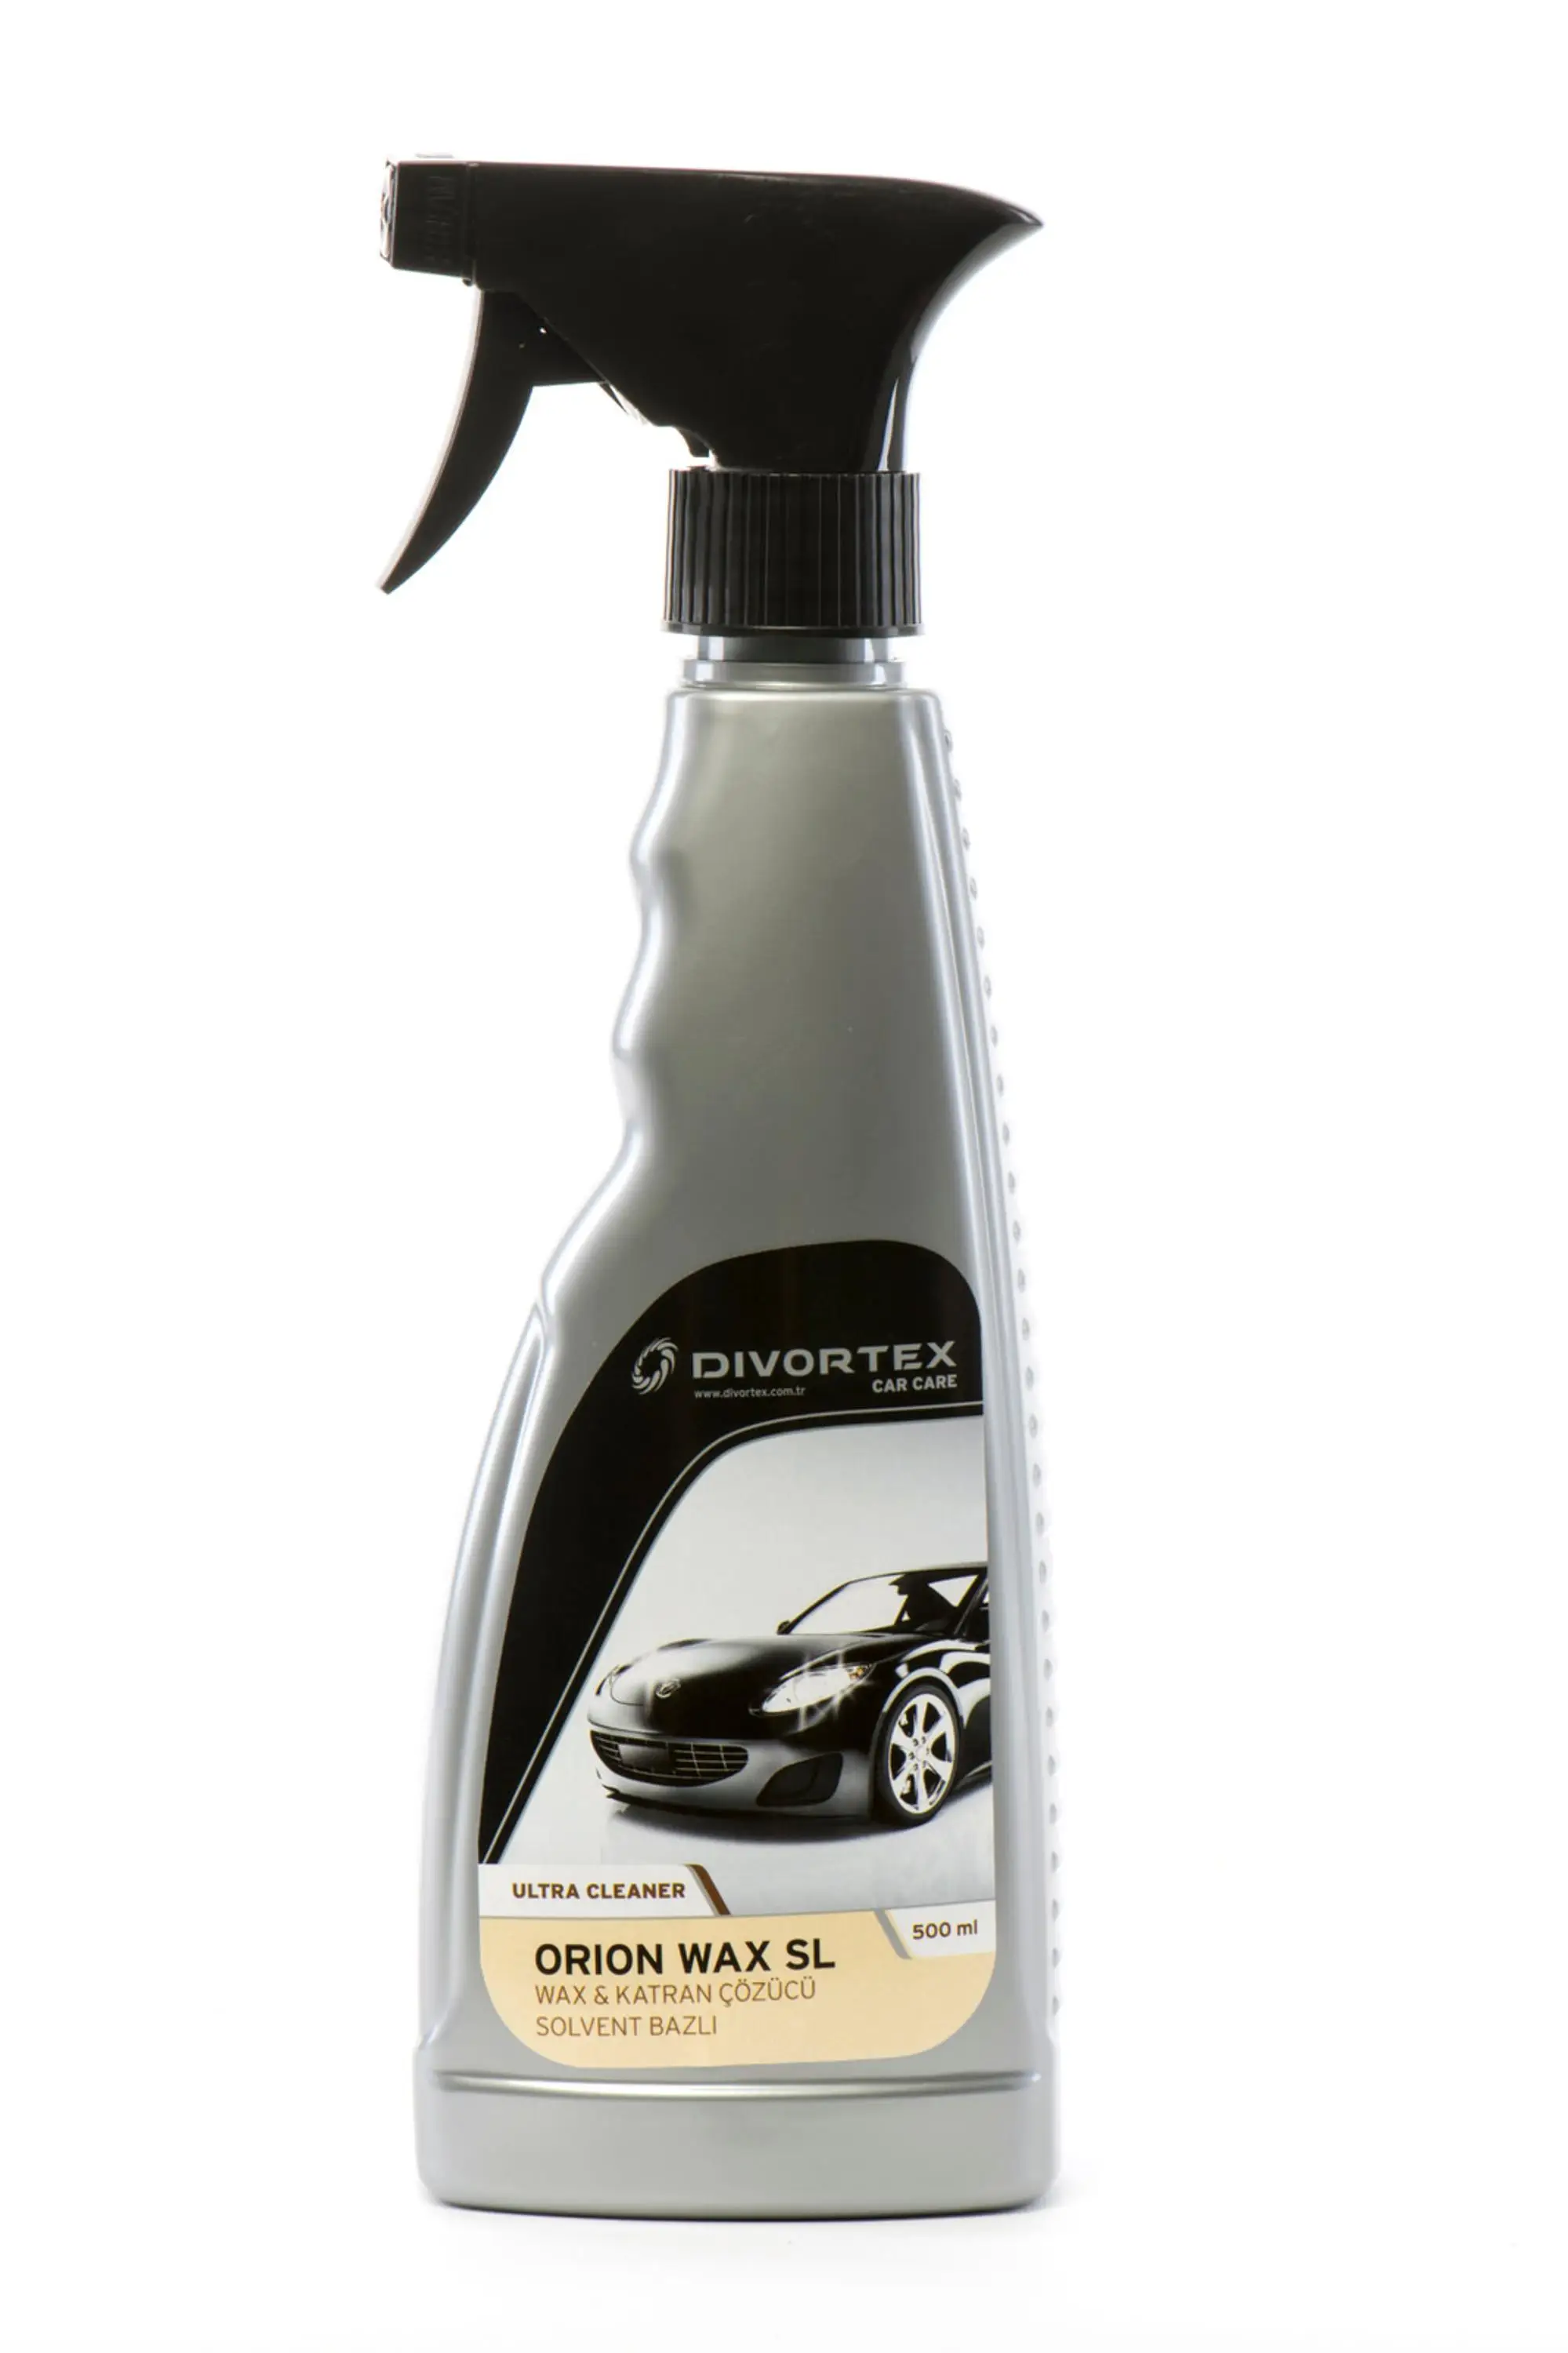 Divortex Solvent Based Wax And Tar Solver Remover 500 Ml Buy